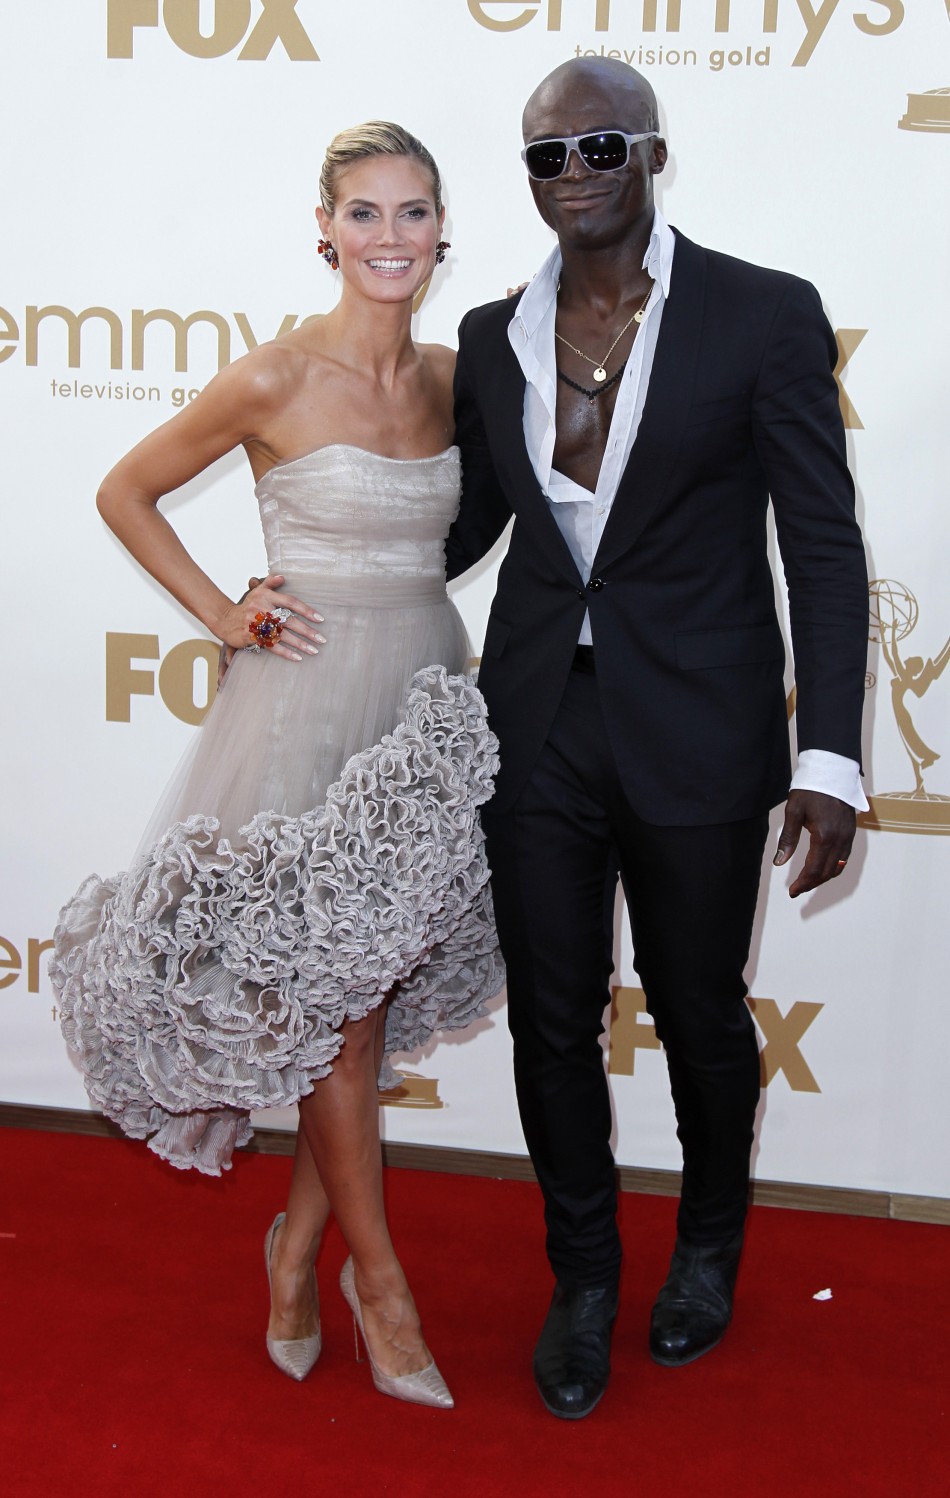 Television host Heidi Klum and her husband, singer Seal, arrive at the 63rd Primetime Emmy Awards in Los Angeles